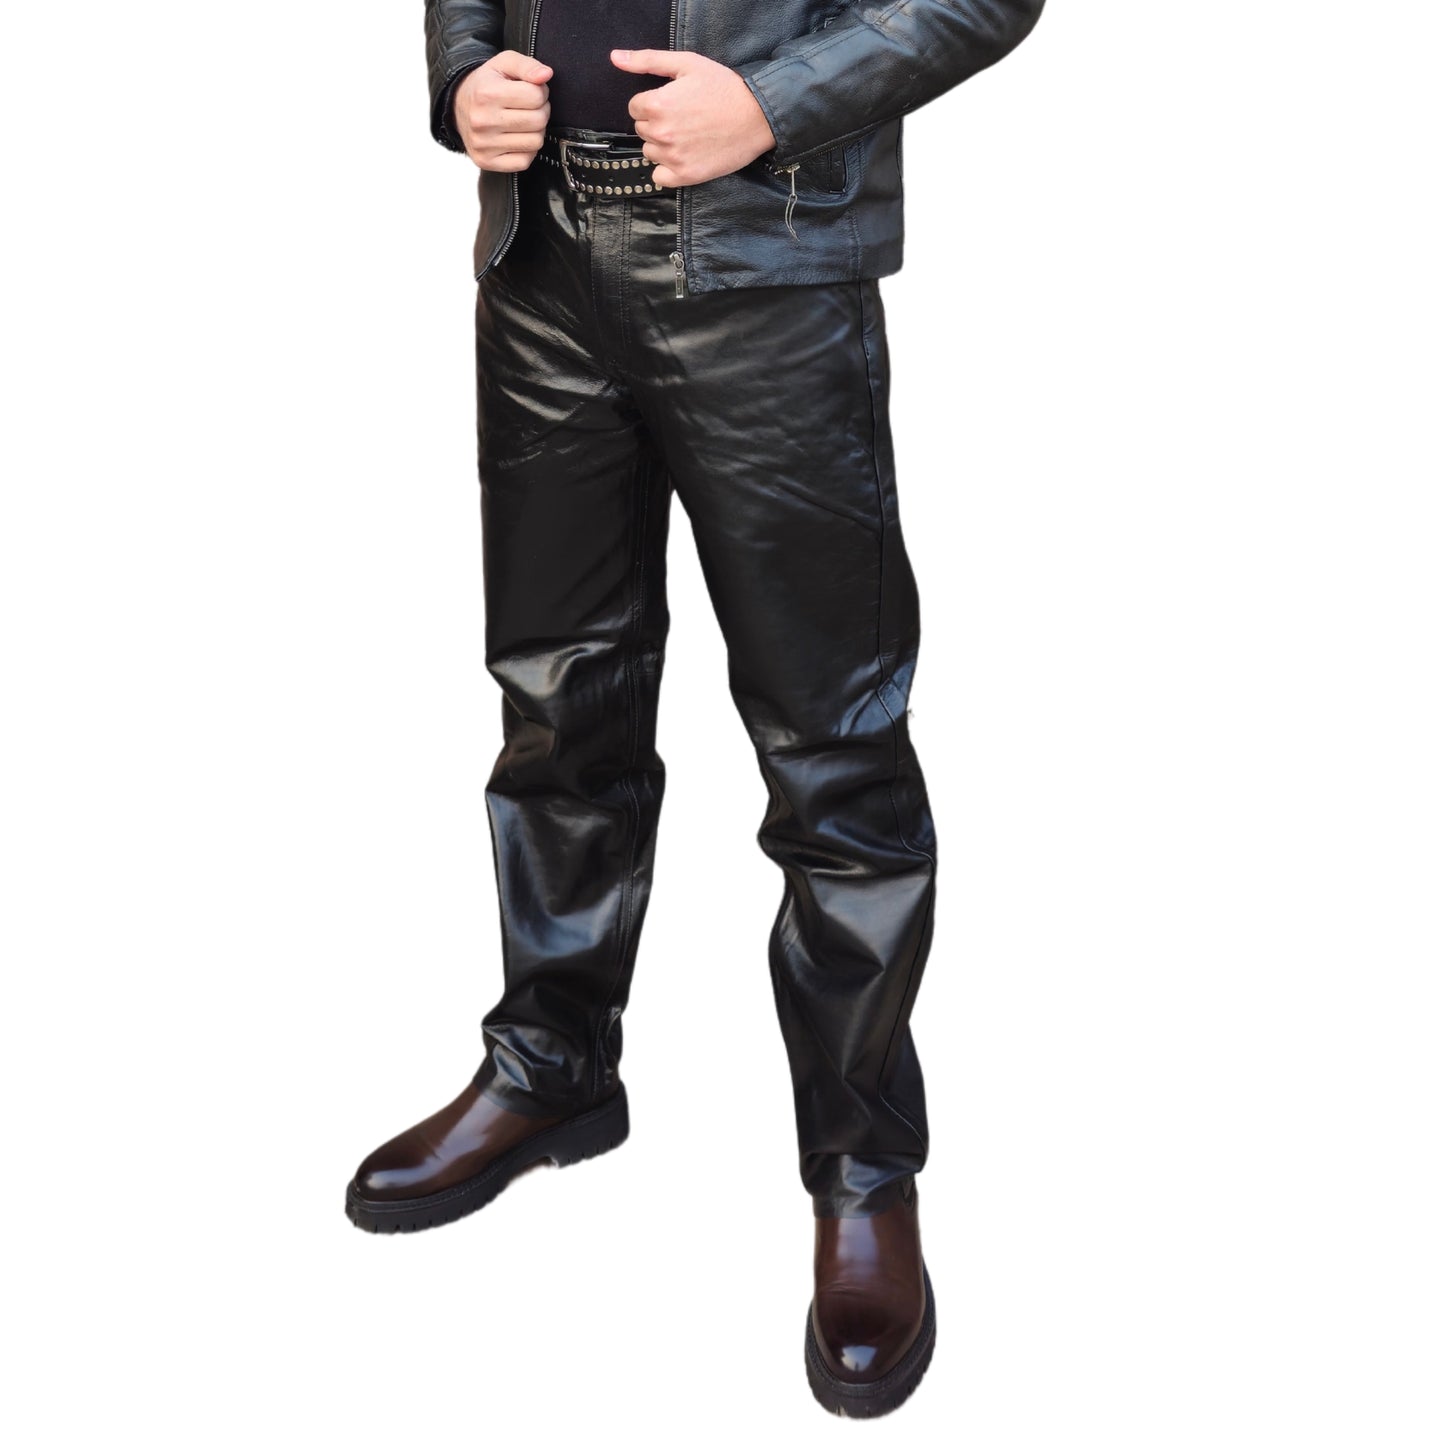 ZAWIAR Mens Black Leather Motorcycle Classic Trousers